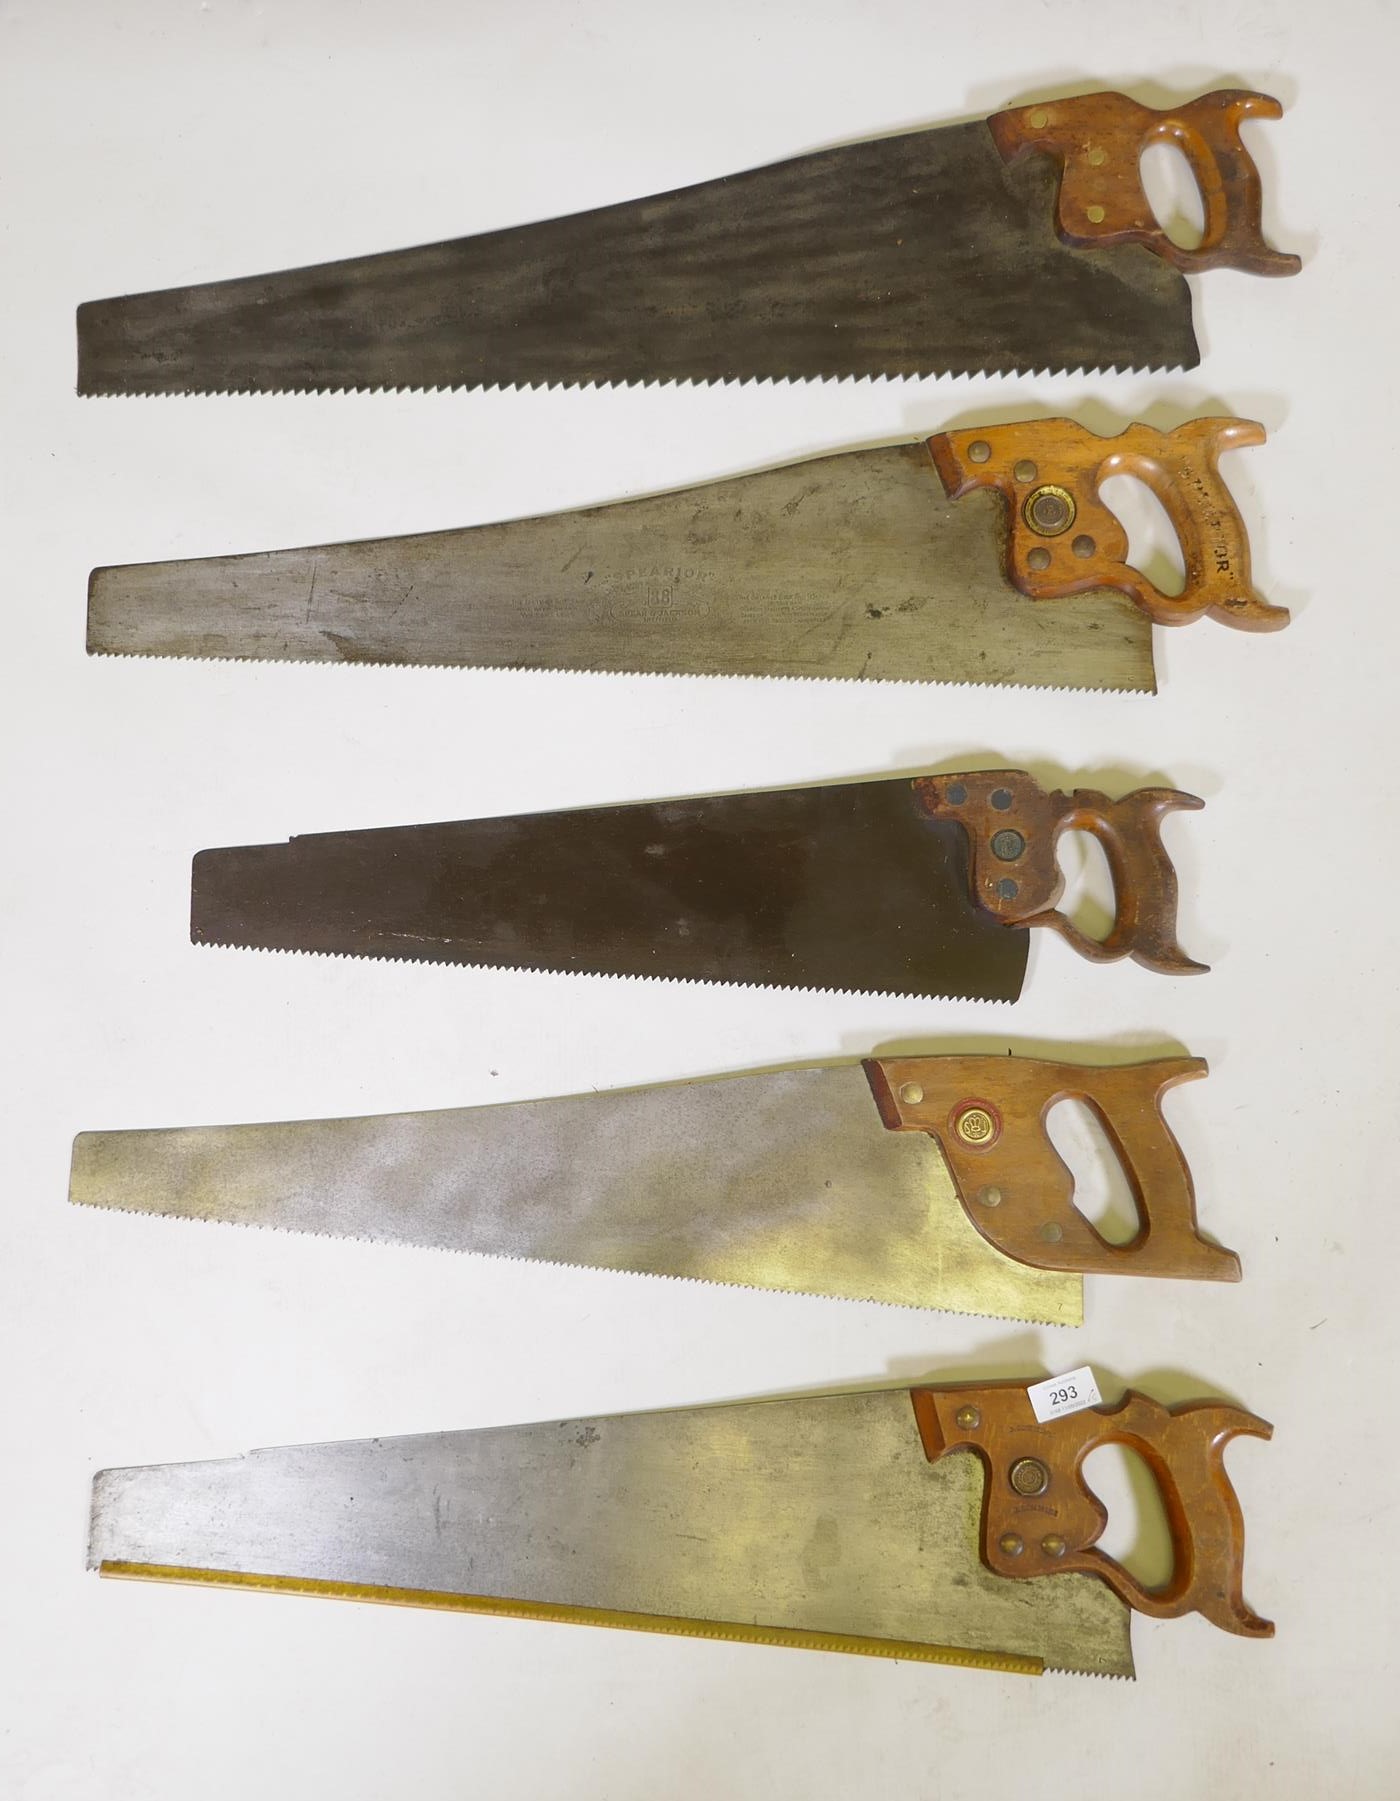 Five vintage Spear & Jackson handsaws with wood handles, largest 30½", and eight vintage